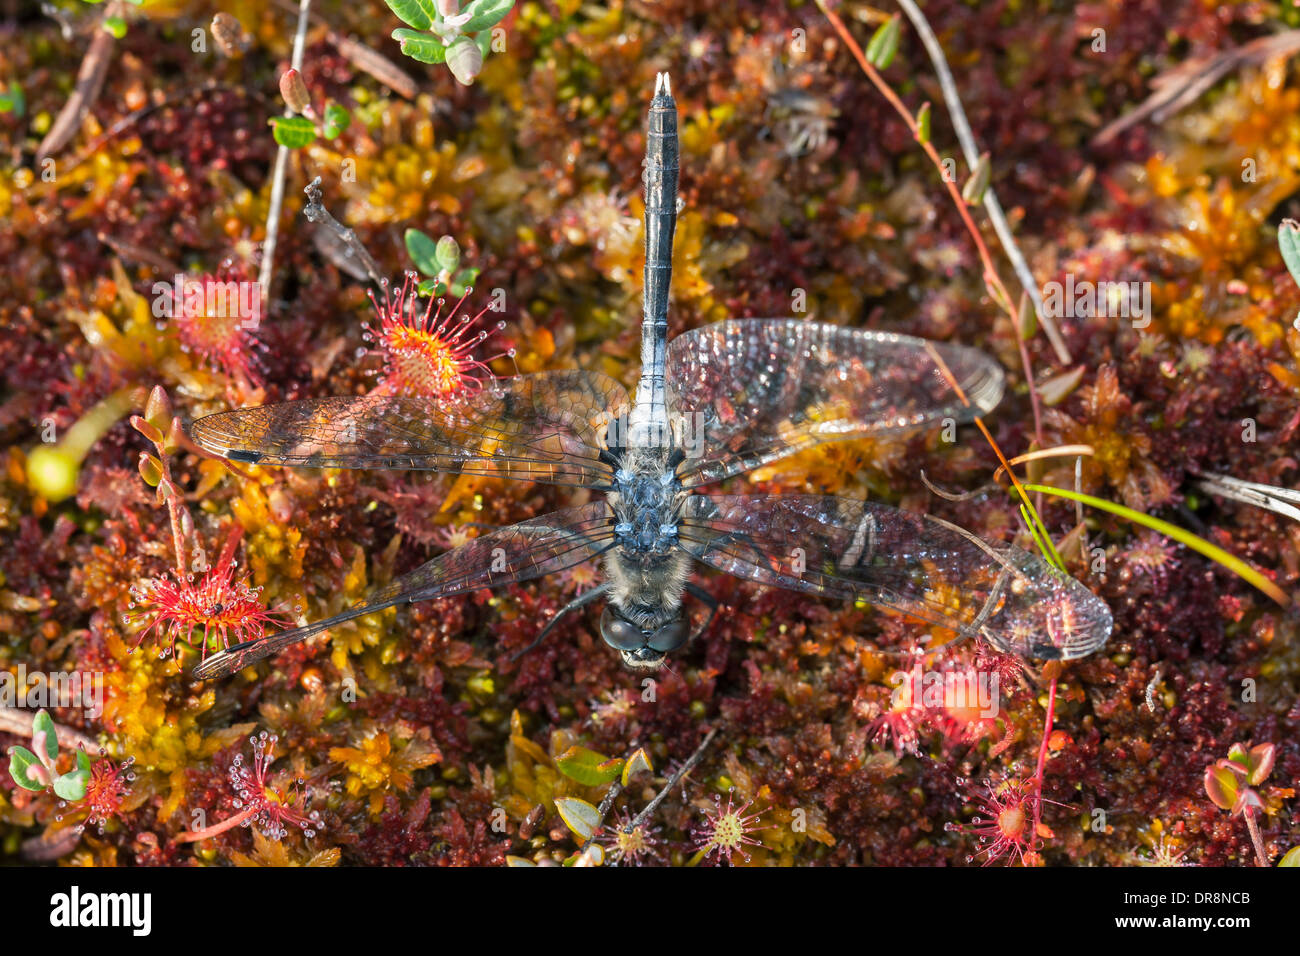 Closeup of a dragonfly stuck on sundew leaves Stock Photo